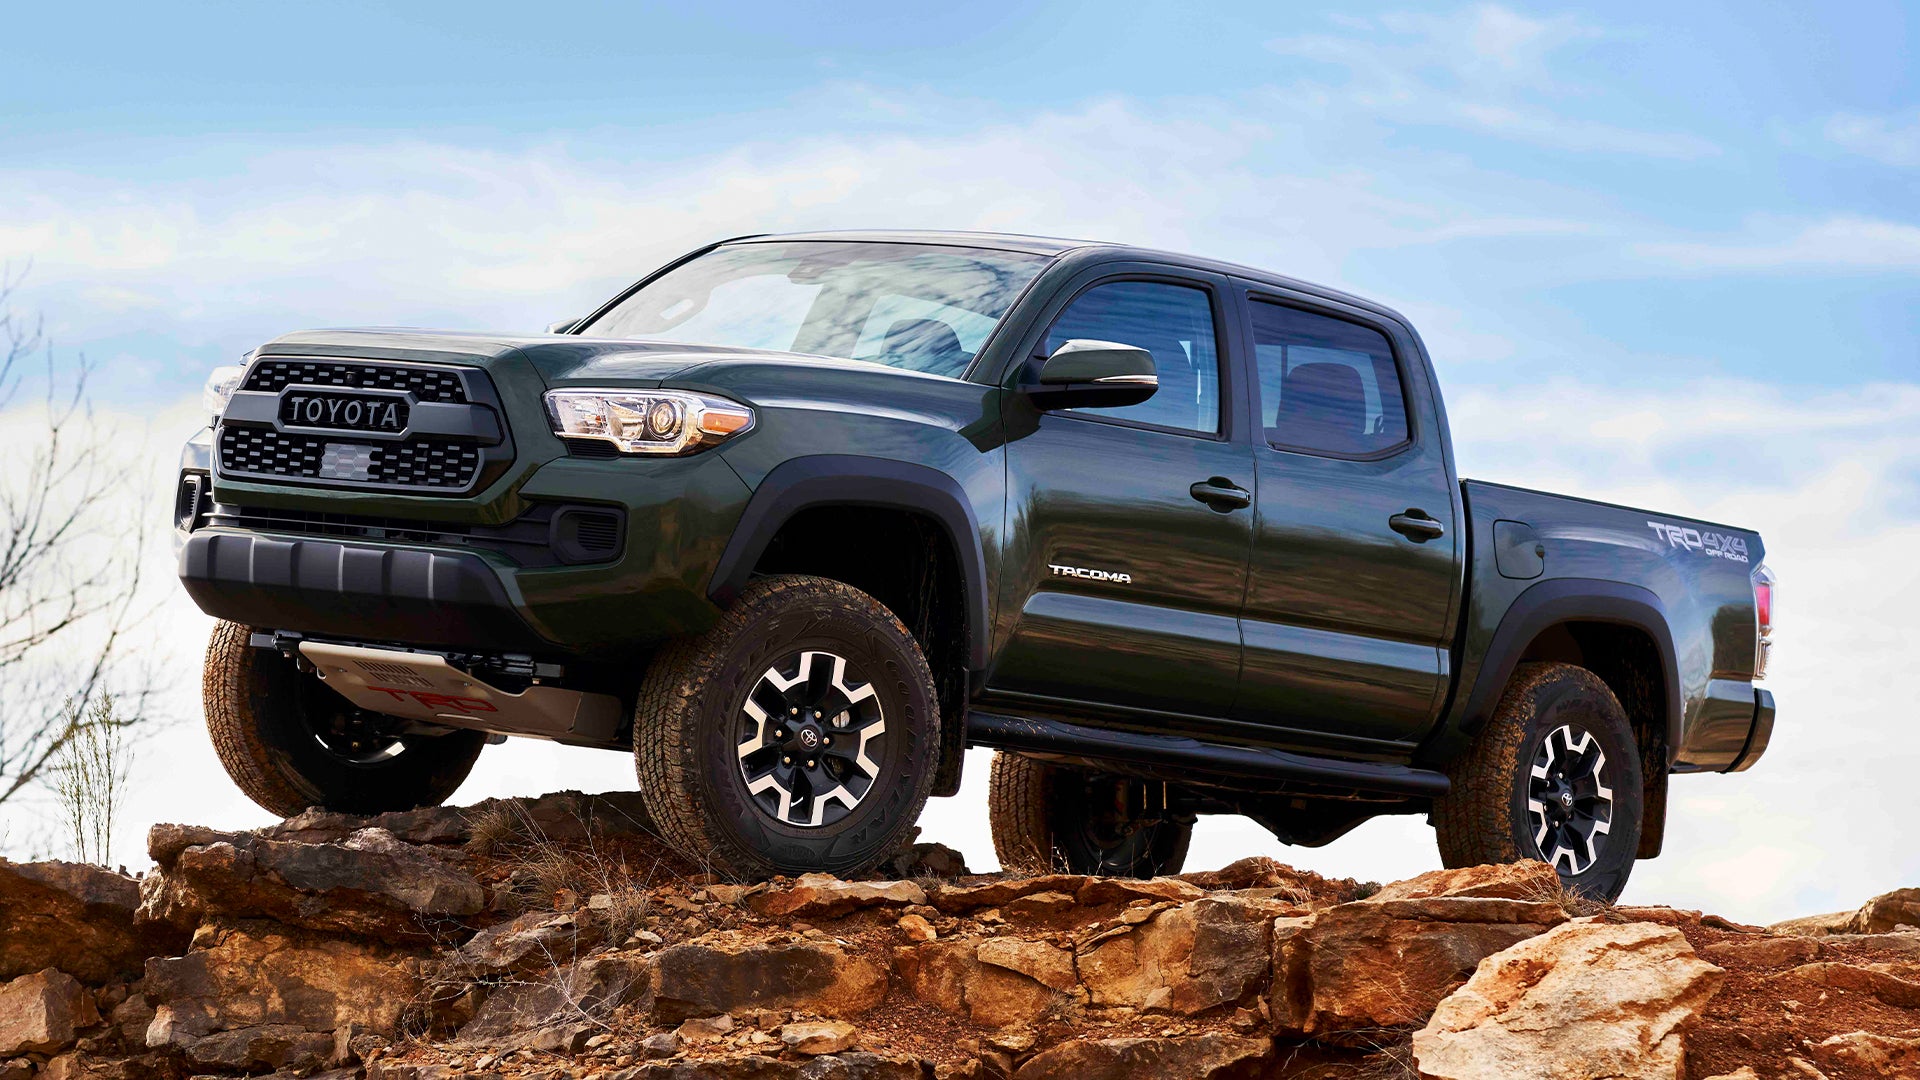 electrified-toyota-pickup-trucks-are-coming-by-2025-the-drive